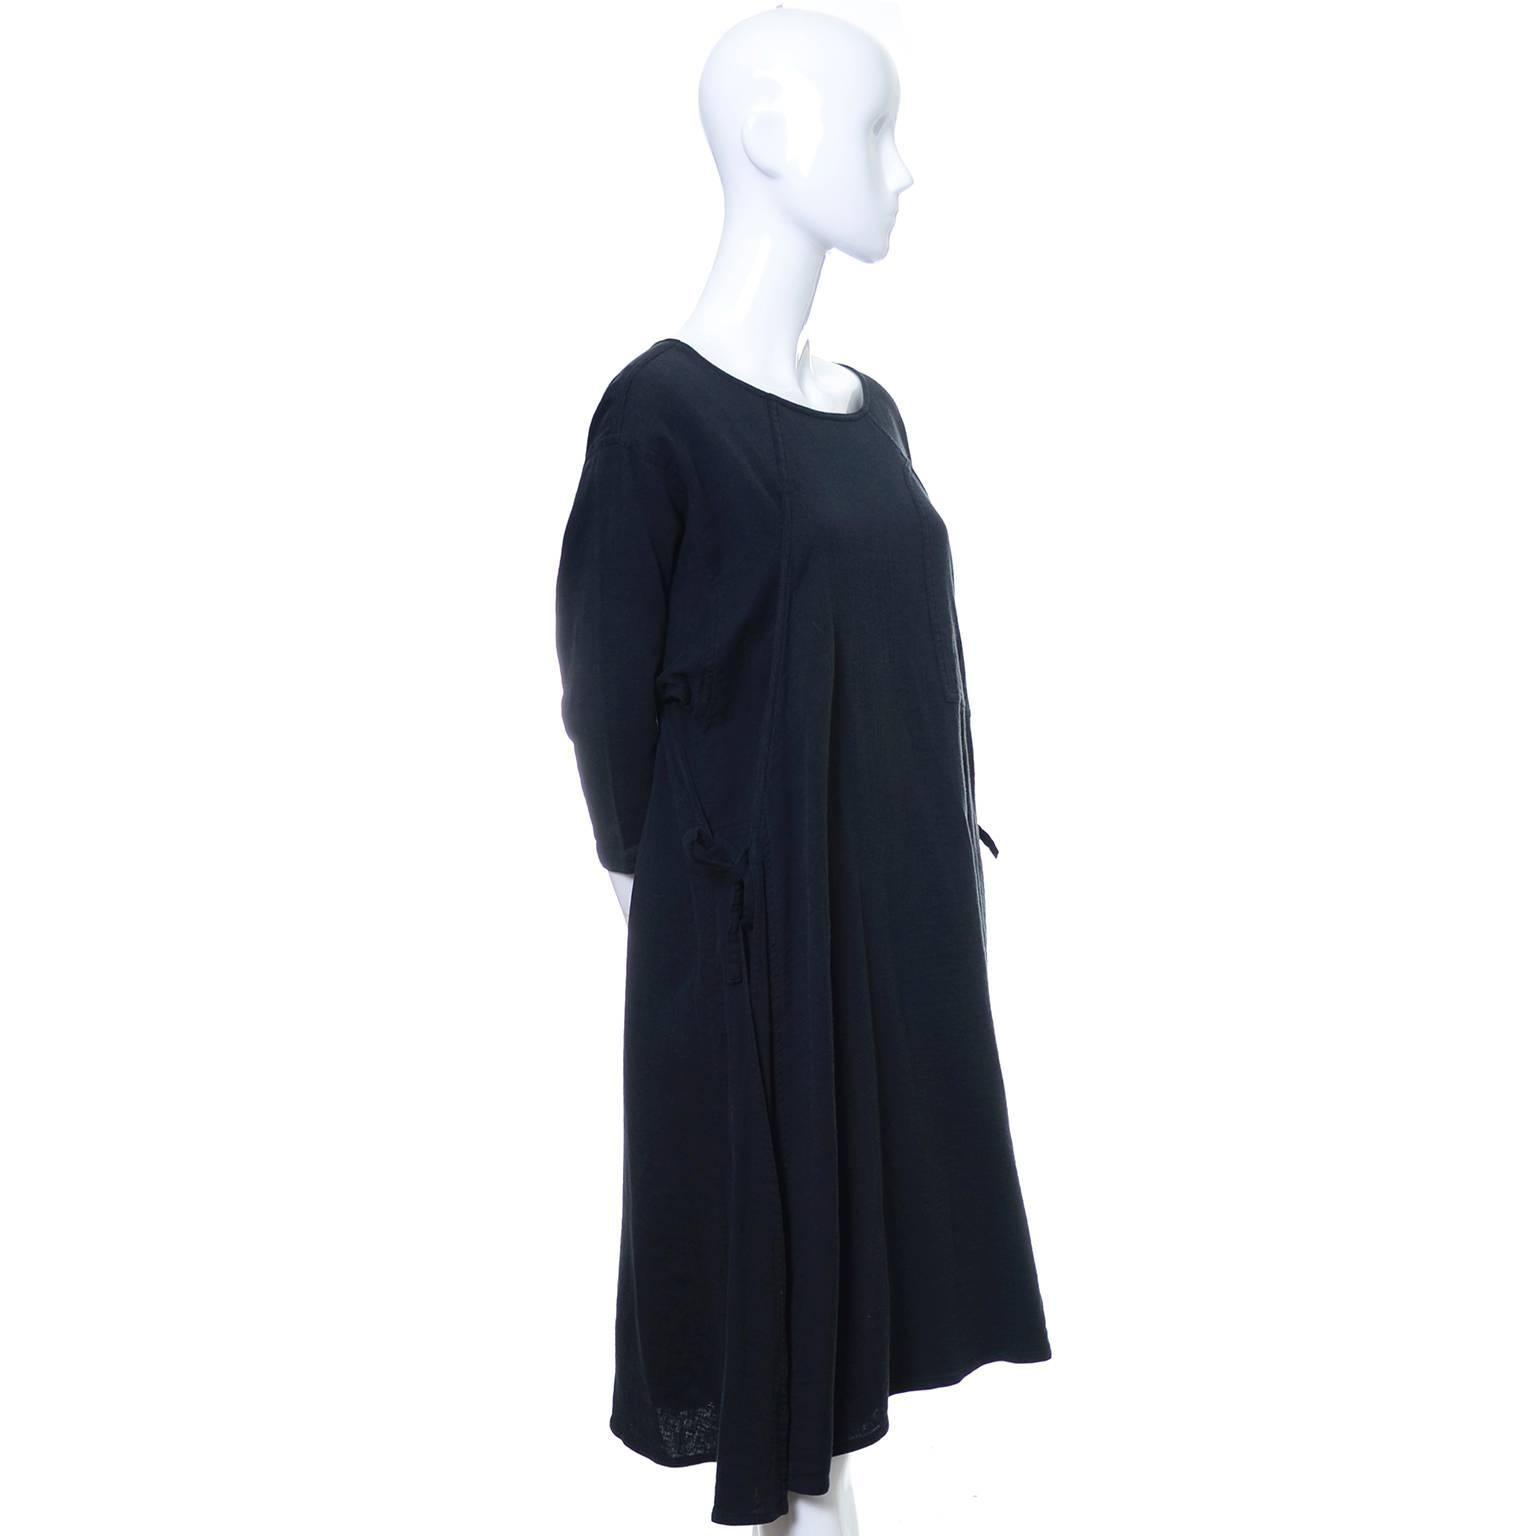 Issey Miyake Sport 1980s Cotton Dress or Tunic Made in Japan Minimalist ...